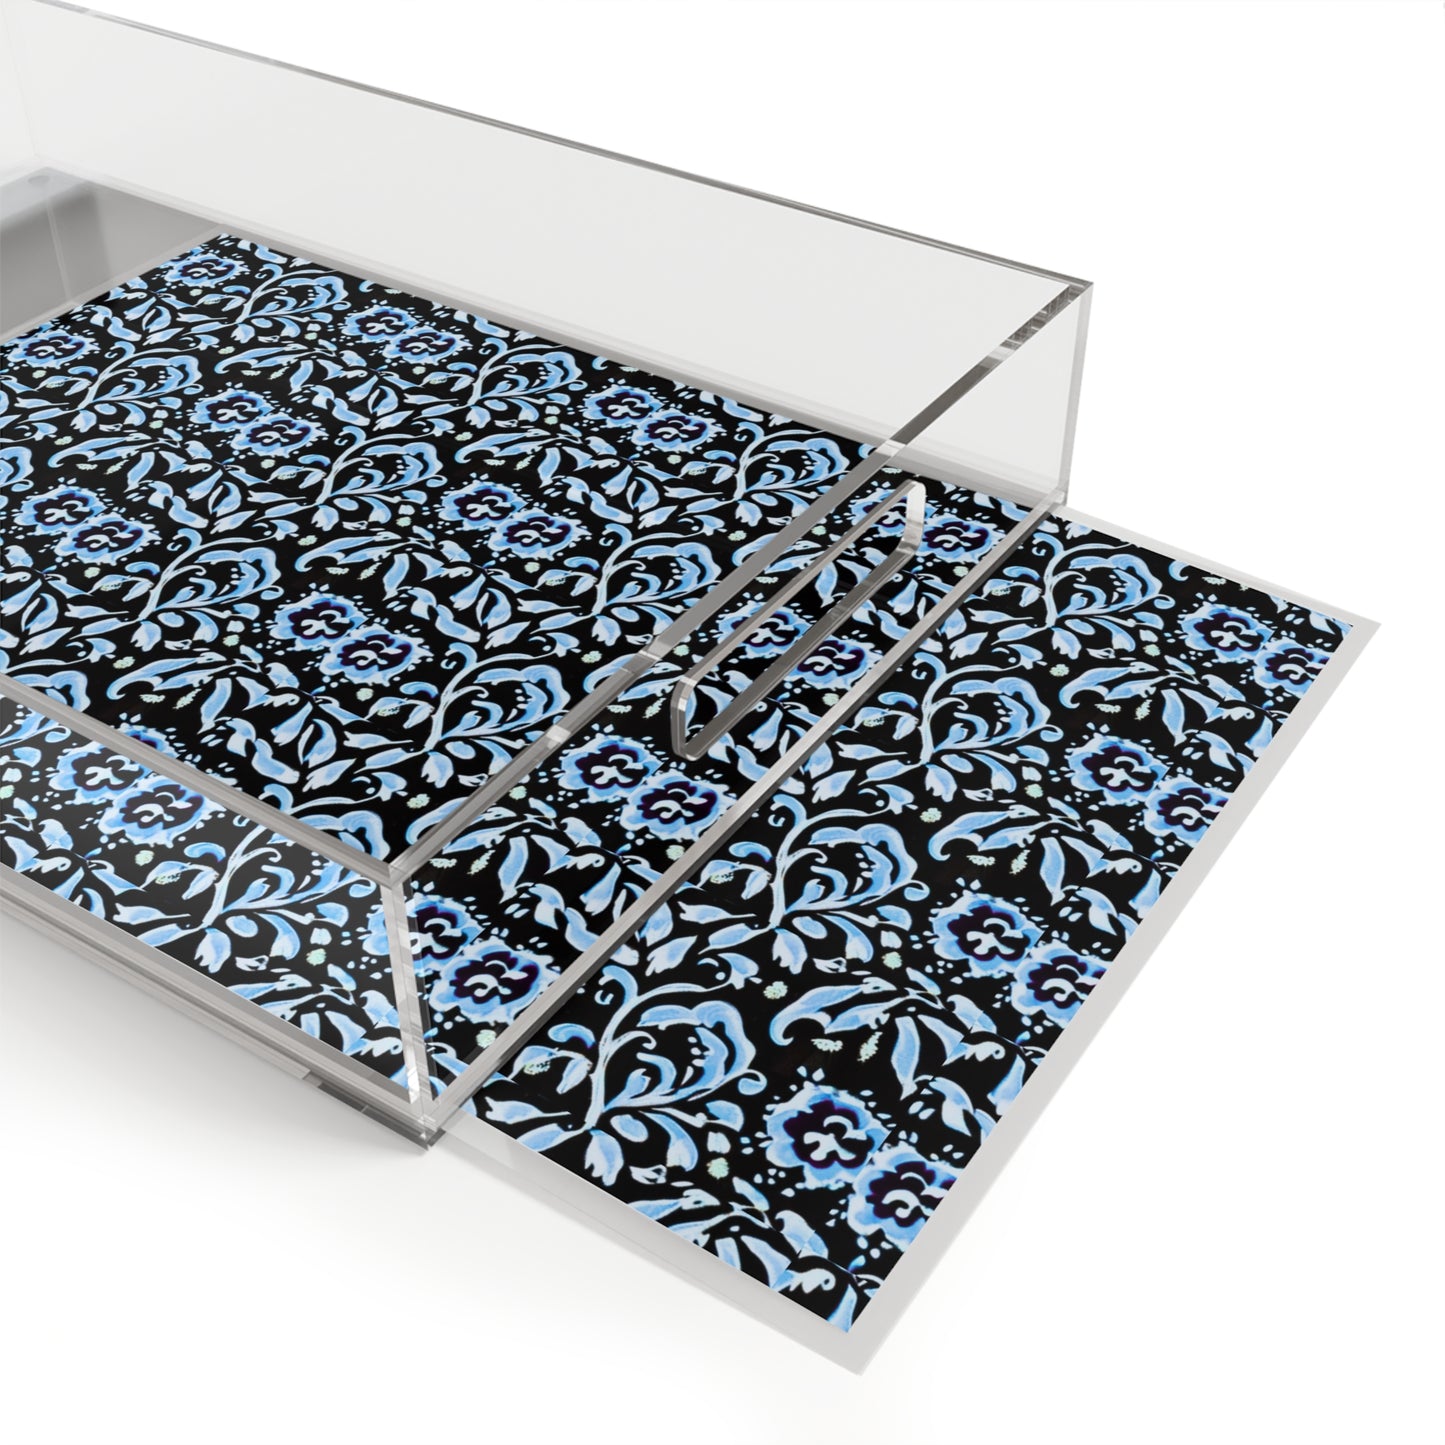 Blue Tropical Island Flower Batik Pattern Cocktail Patio Party Acrylic Serving Tray